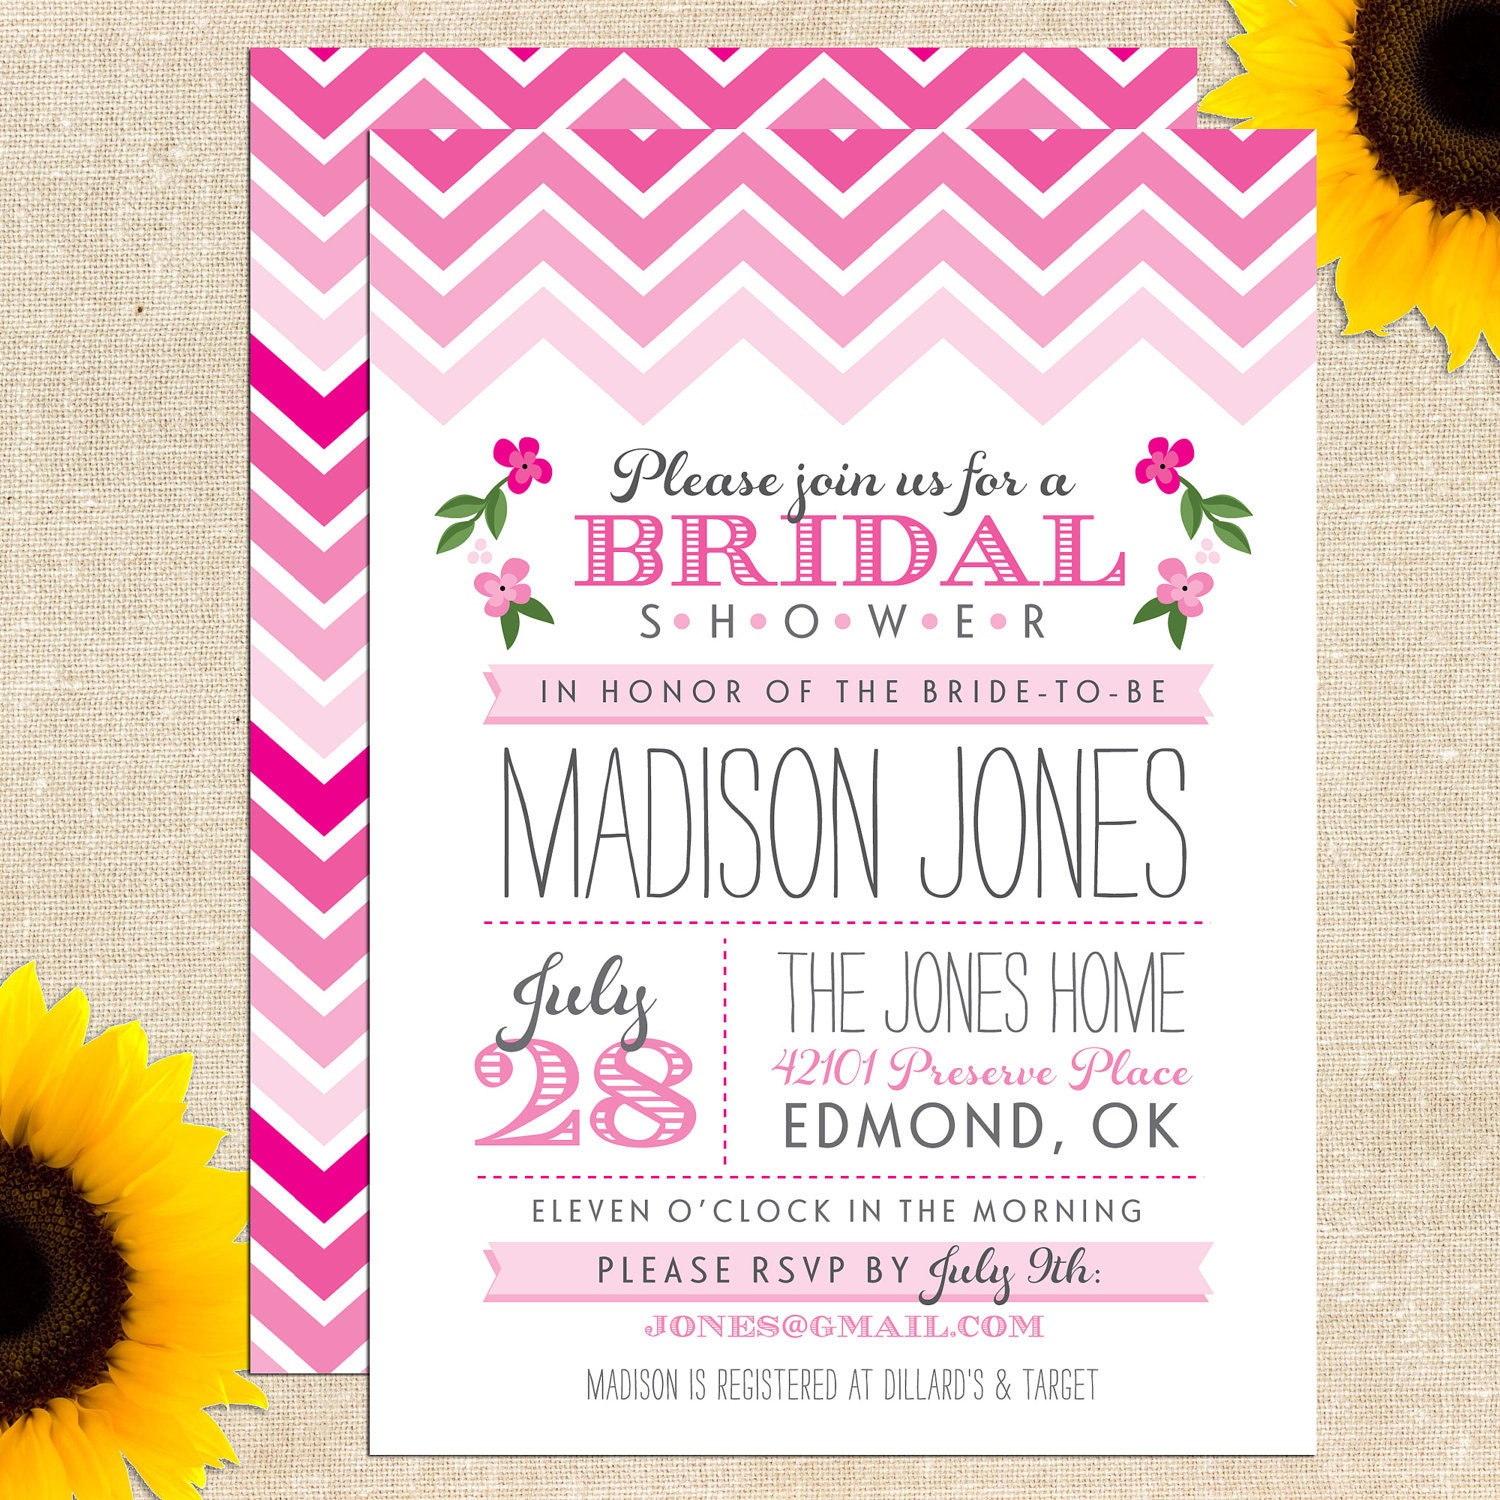 related article Do It Yourself Bridal Shower Invitations